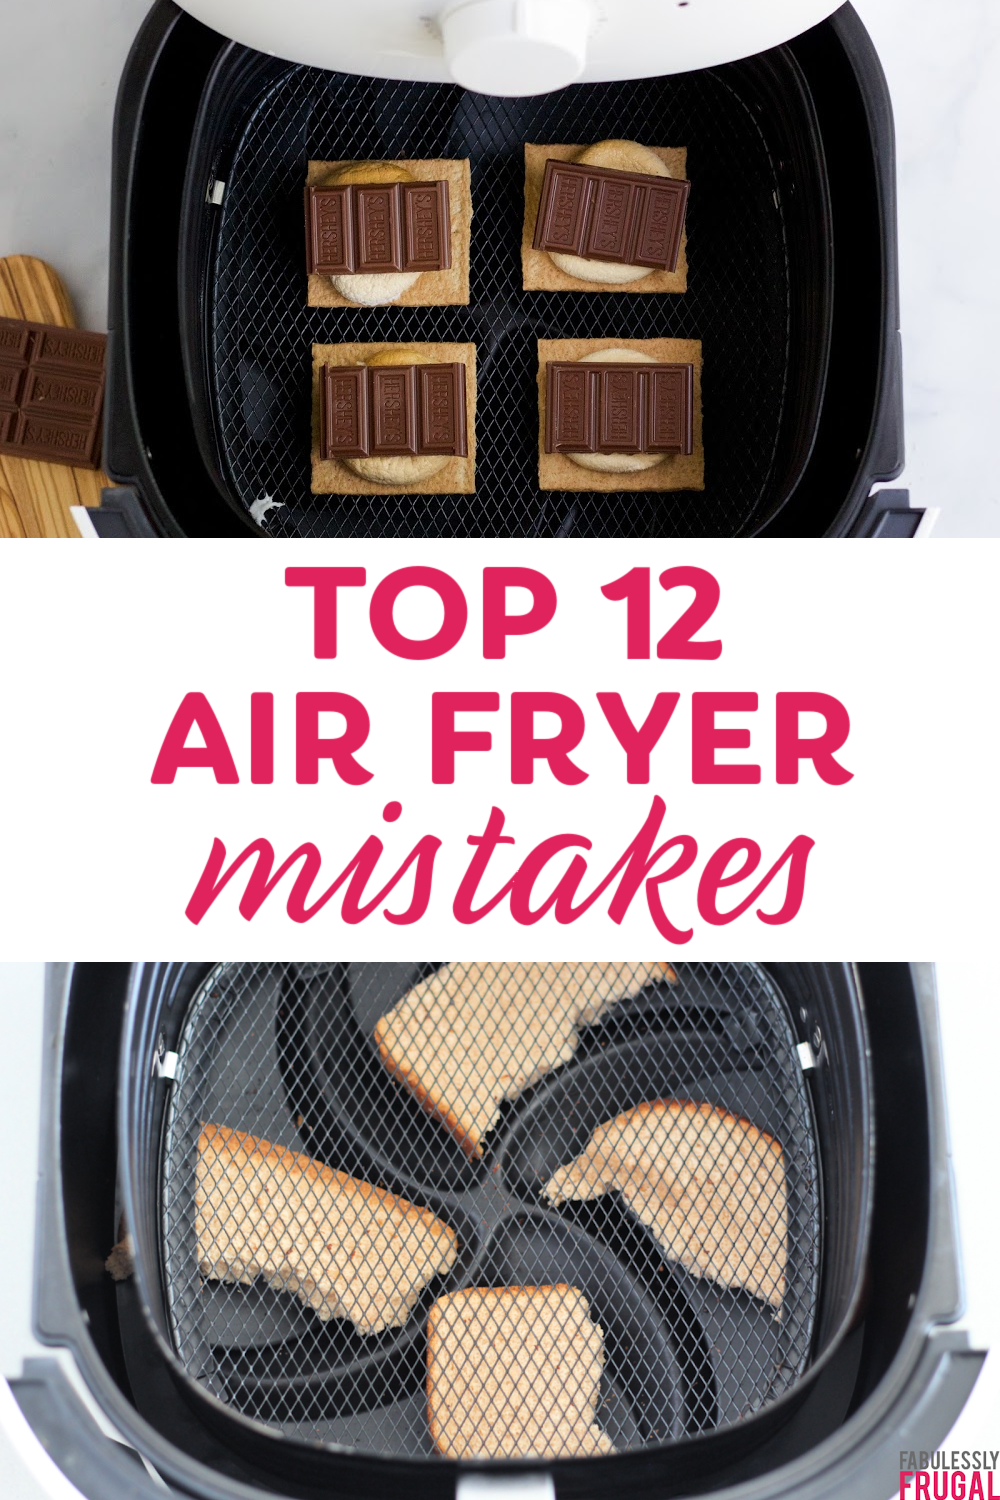 9 Easy Fixes for the Top Air Fryer Mistakes – PureWow